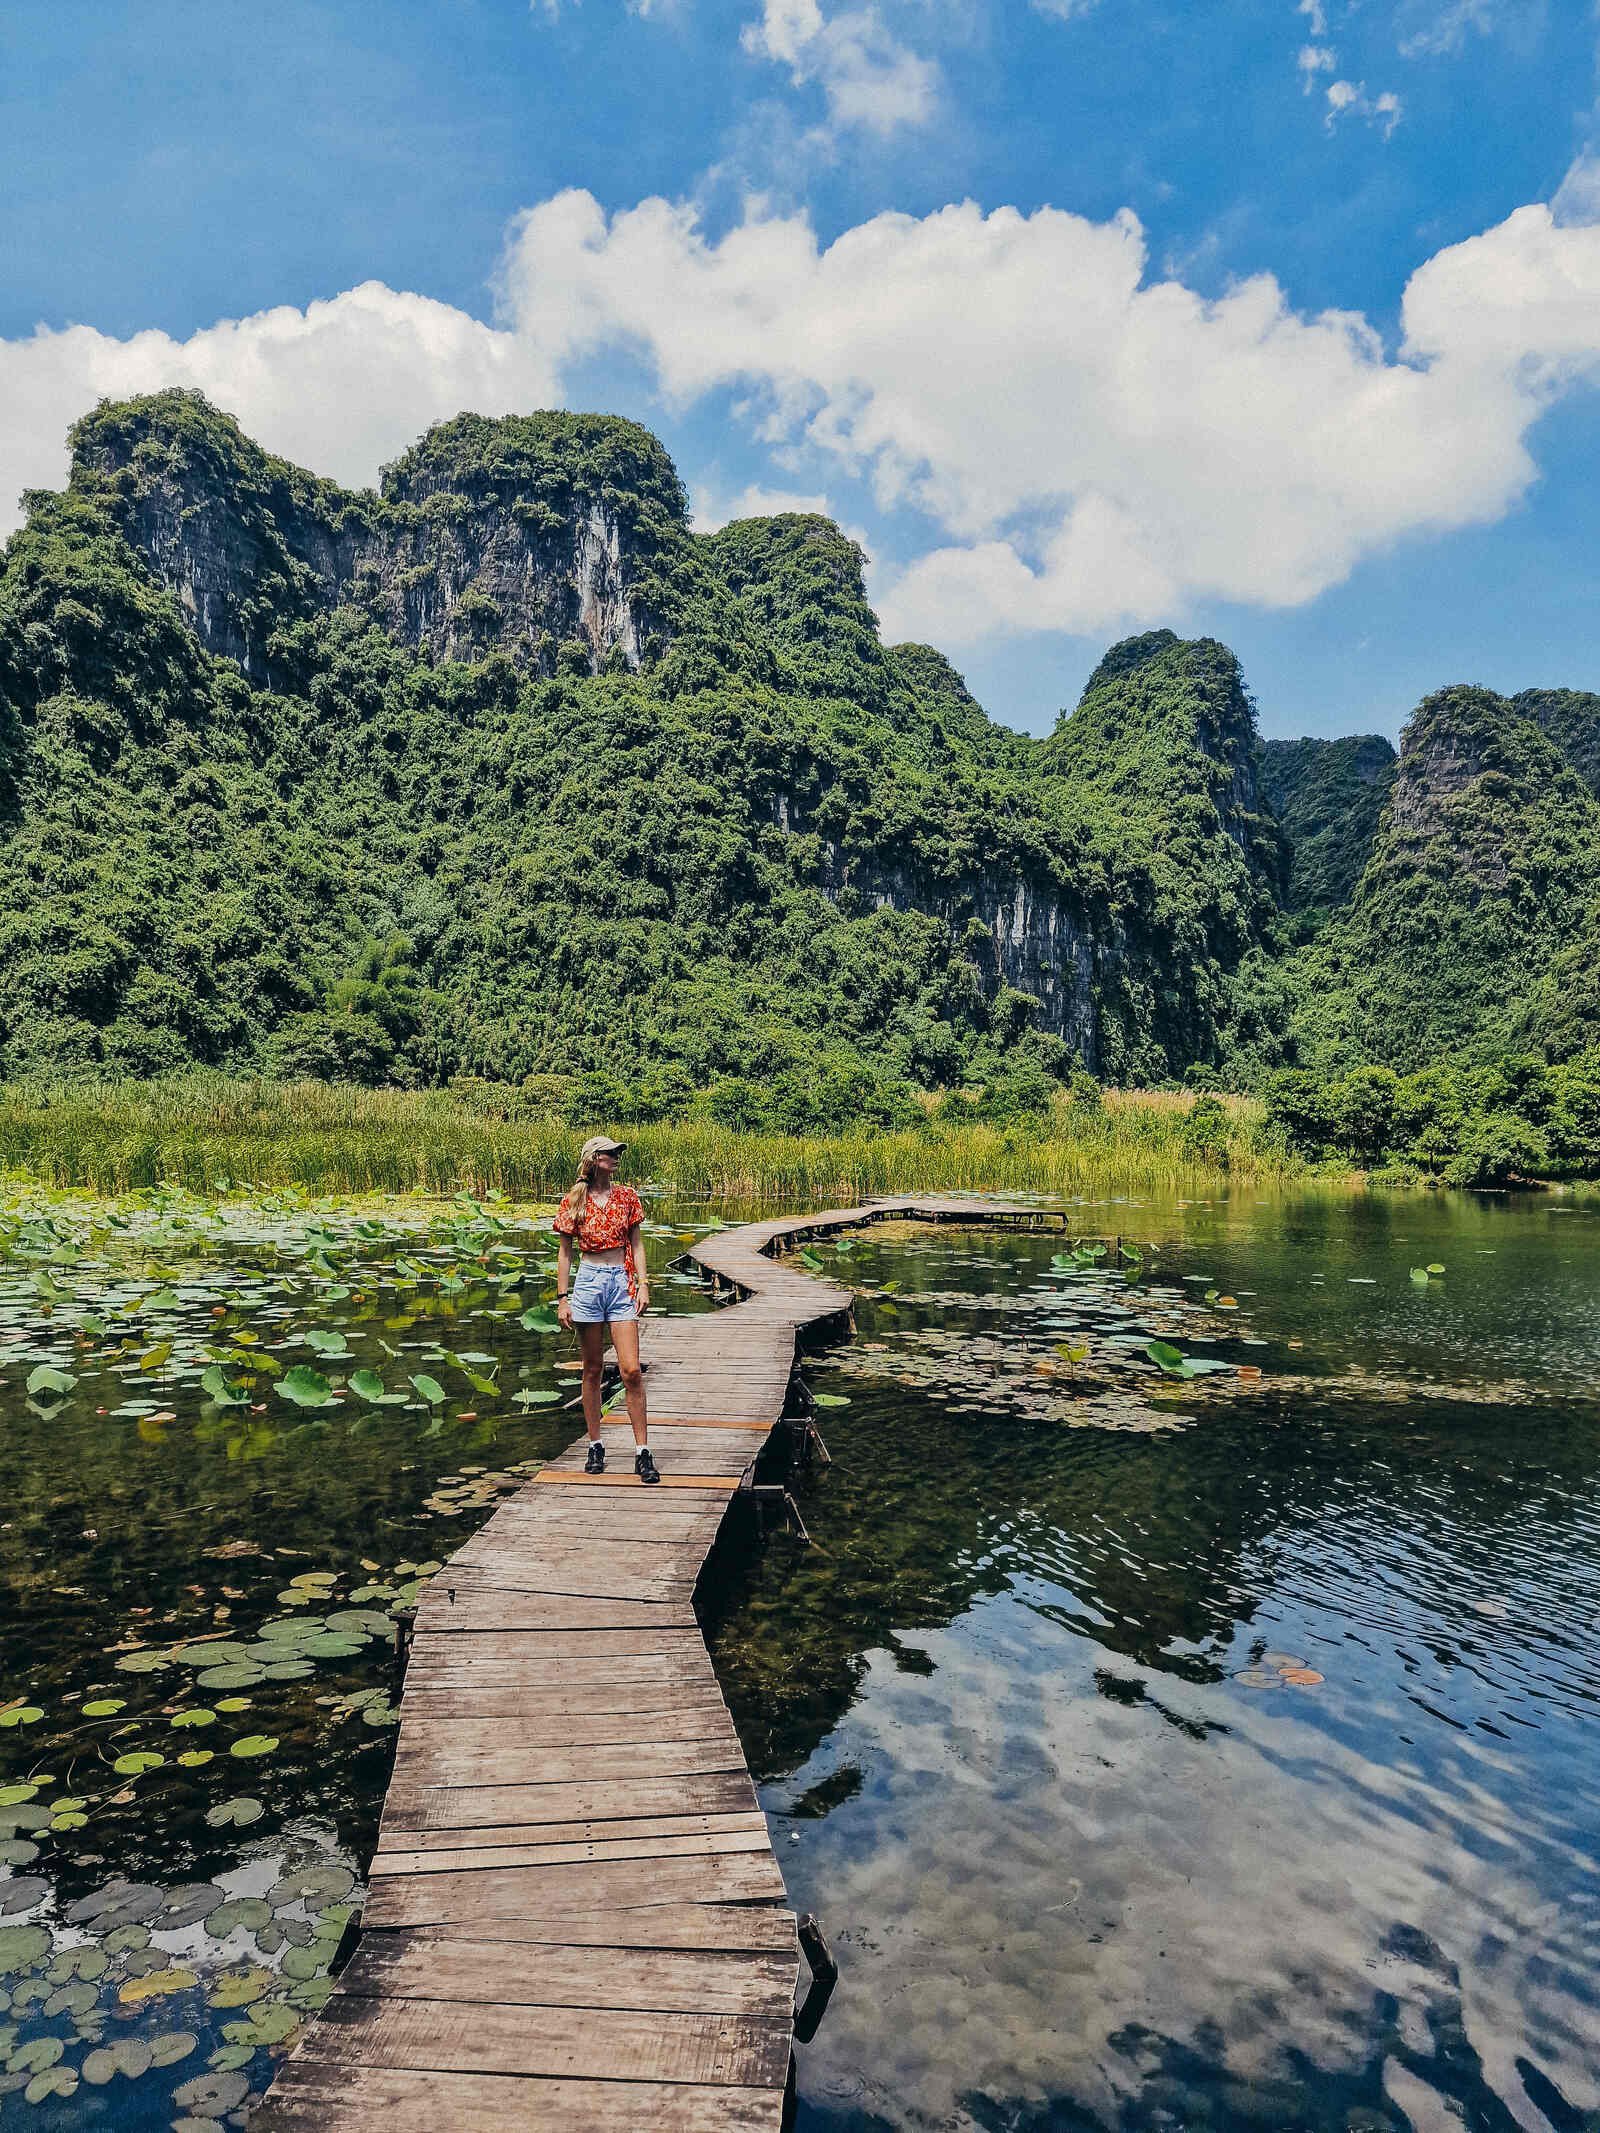 Helena standing on a wooden walkway on the water with green lilypads and lush cliffs in the background